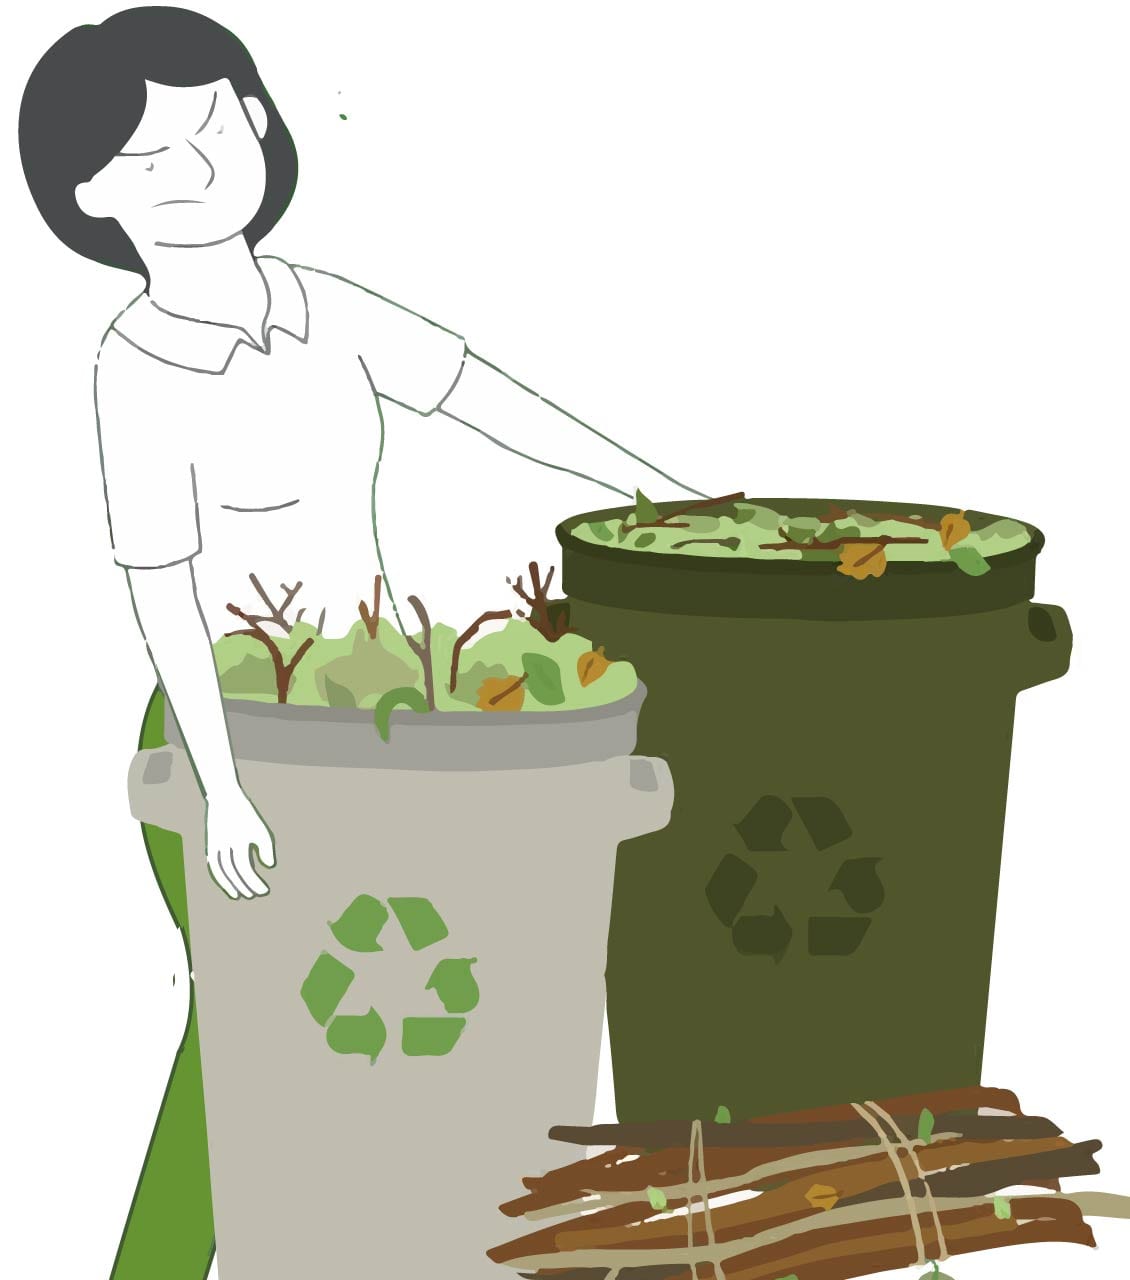 Yard waste removal services